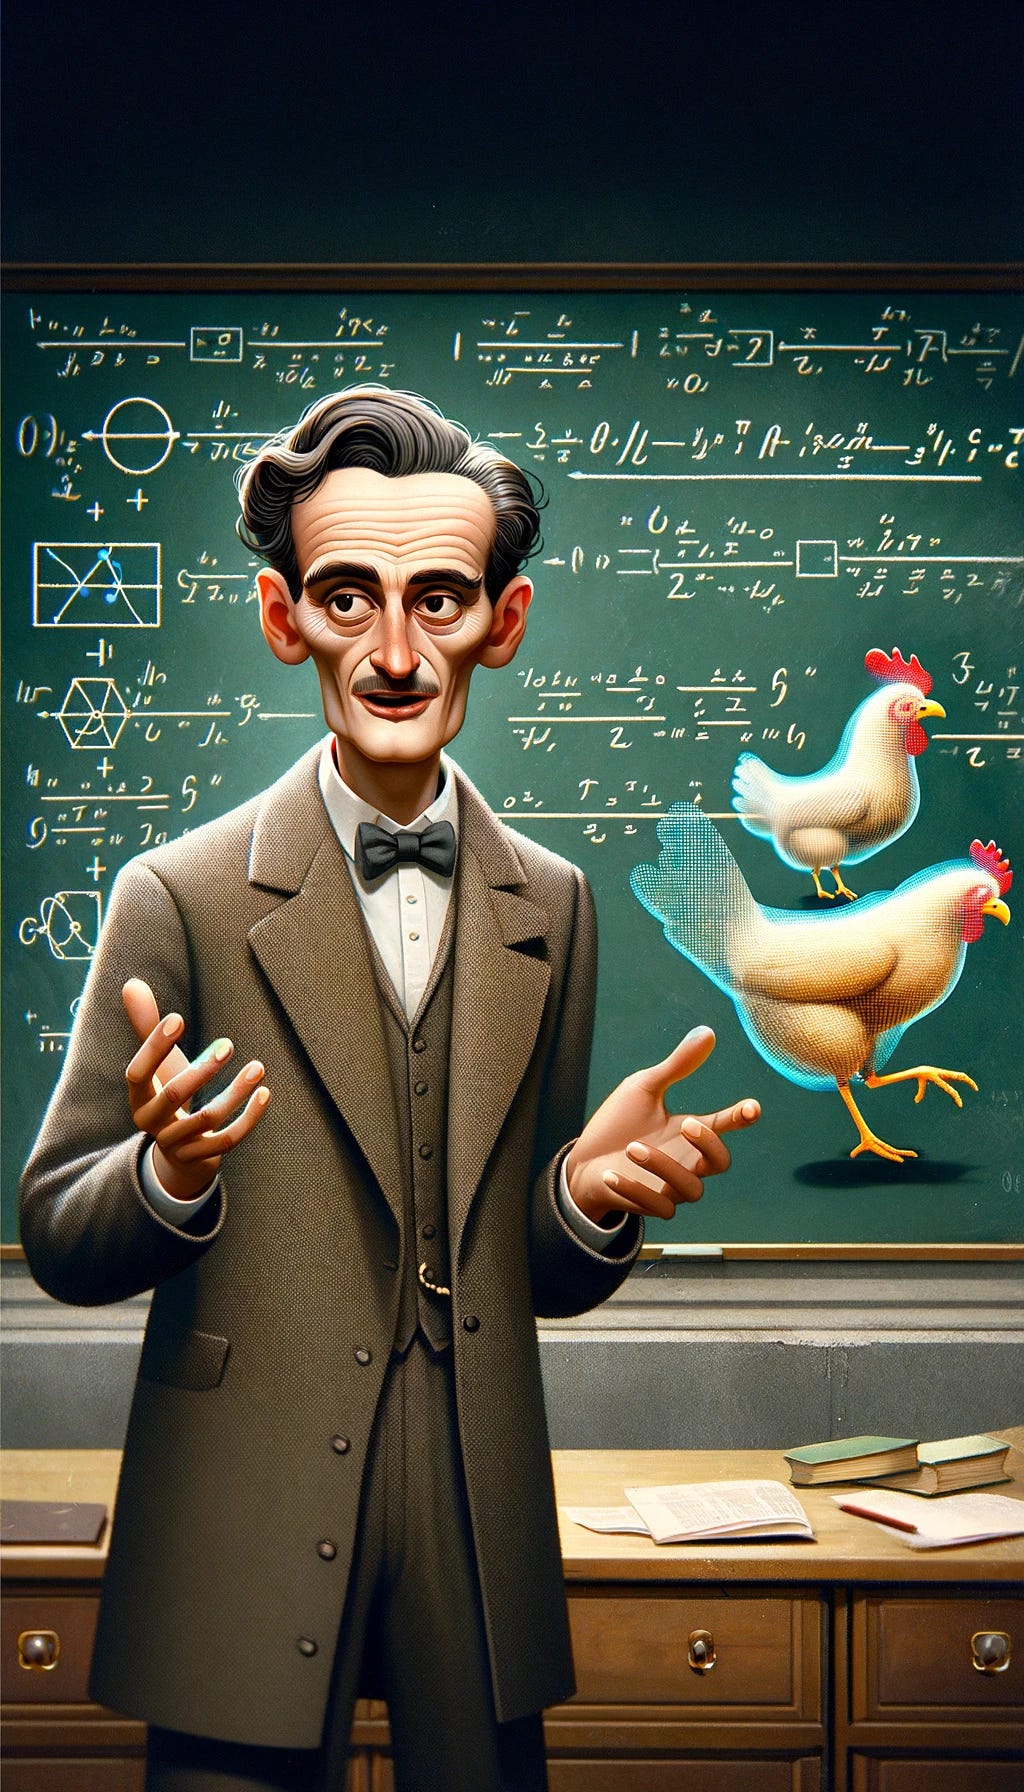 A whimsical portrait of a theoretical physicist resembling Paul Dirac, depicted as if explaining a complex theory humorously. The character is a Caucasian male with a slim build and neatly combed hair, dressed in a traditional 1930s suit. He stands in front of a chalkboard filled with equations related to quantum mechanics. In the foreground, a cartoonish chicken appears, represented in multiple translucent forms, symbolizing its simultaneous different paths across a road, visually illustrating the concept of quantum superposition and the sum over histories.